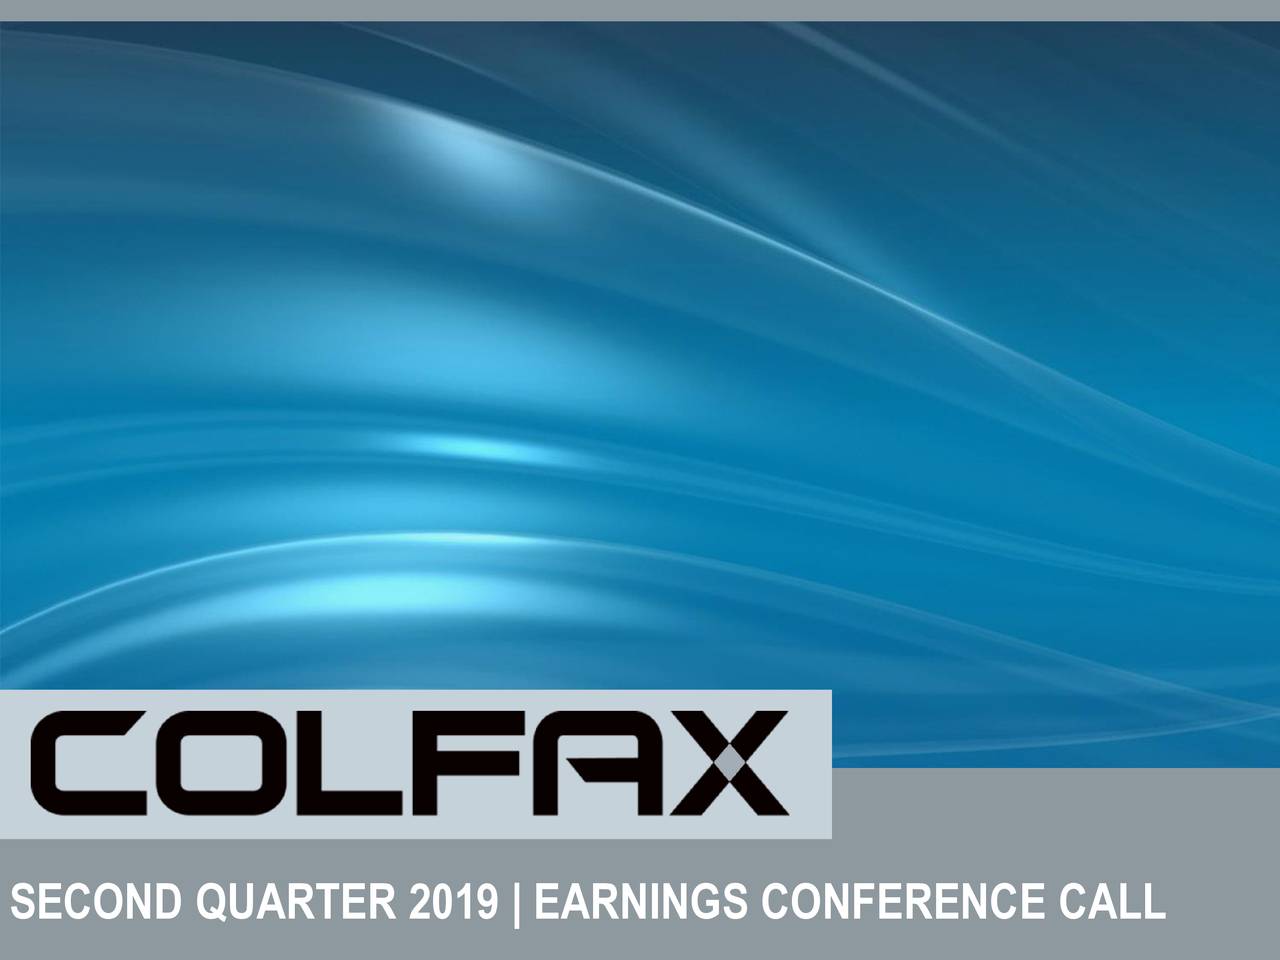 SECOND QUARTER 2019 | EARNINGS CONFERENCE CALL